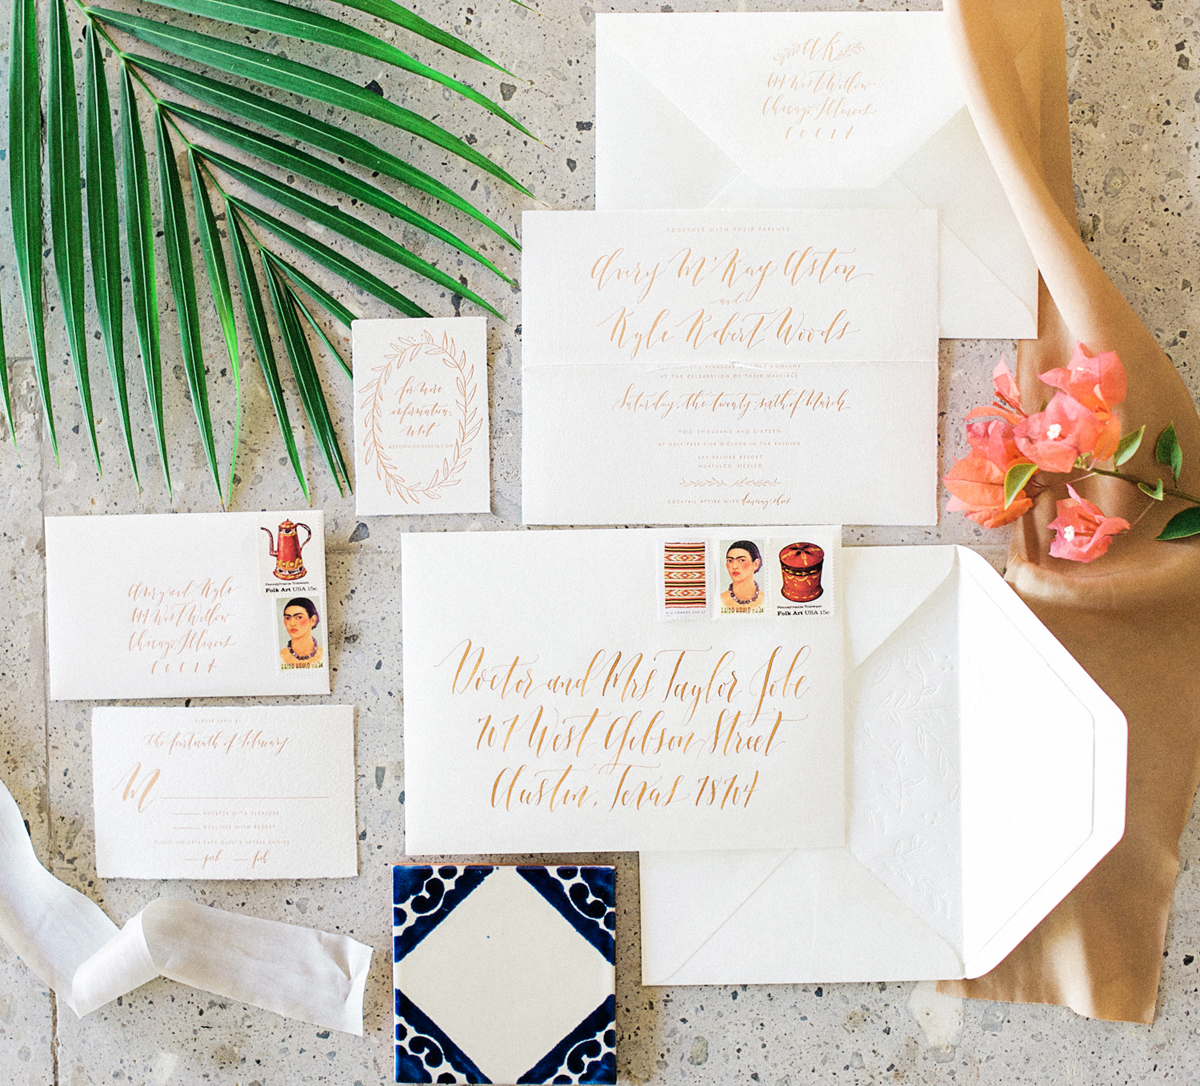 How to Properly Address Your Wedding Invitations